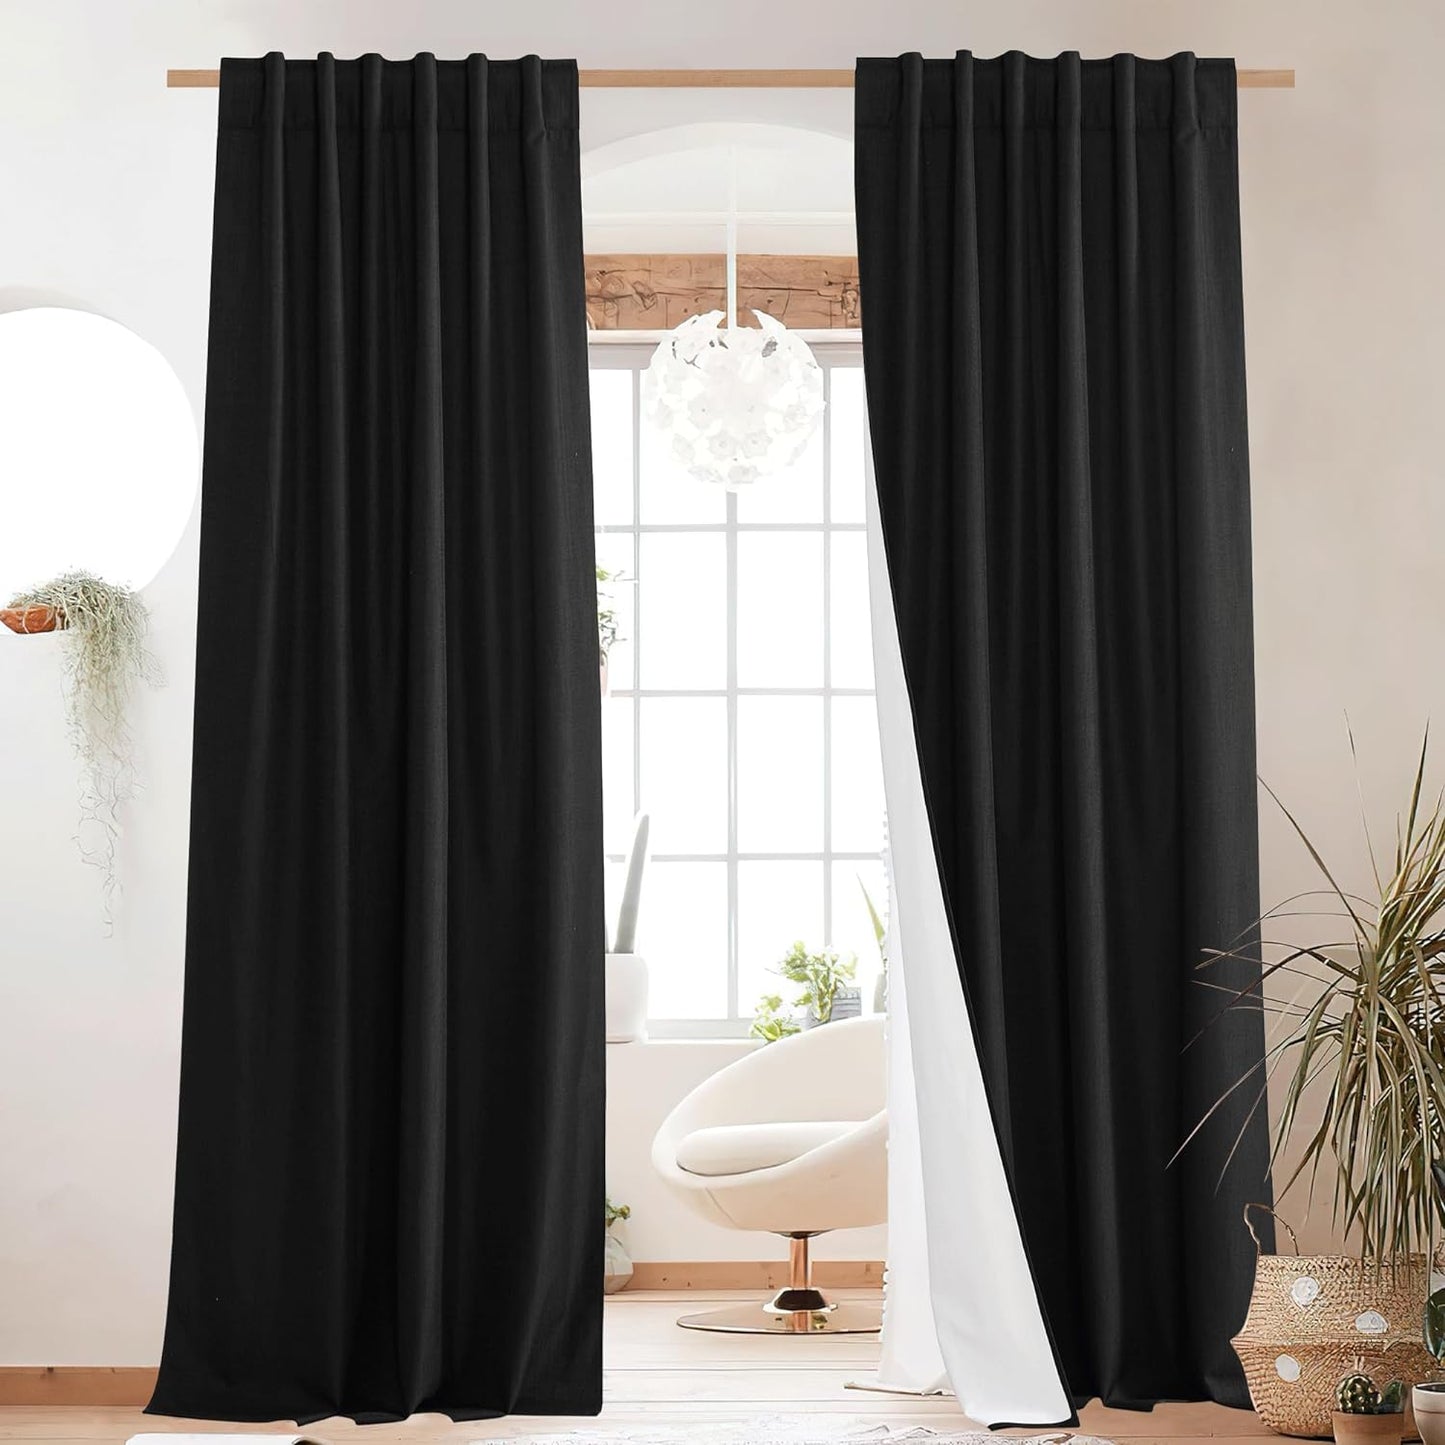 NICETOWN 100% Blackout Linen Curtains for Living Room with Thermal Insulated White Liner, Ivory, 52" Wide, 2 Panels, 84" Long Drapes, Back Tab Retro Linen Curtains Vertical Drapes Privacy for Bedroom  NICETOWN Black W52 X L84 